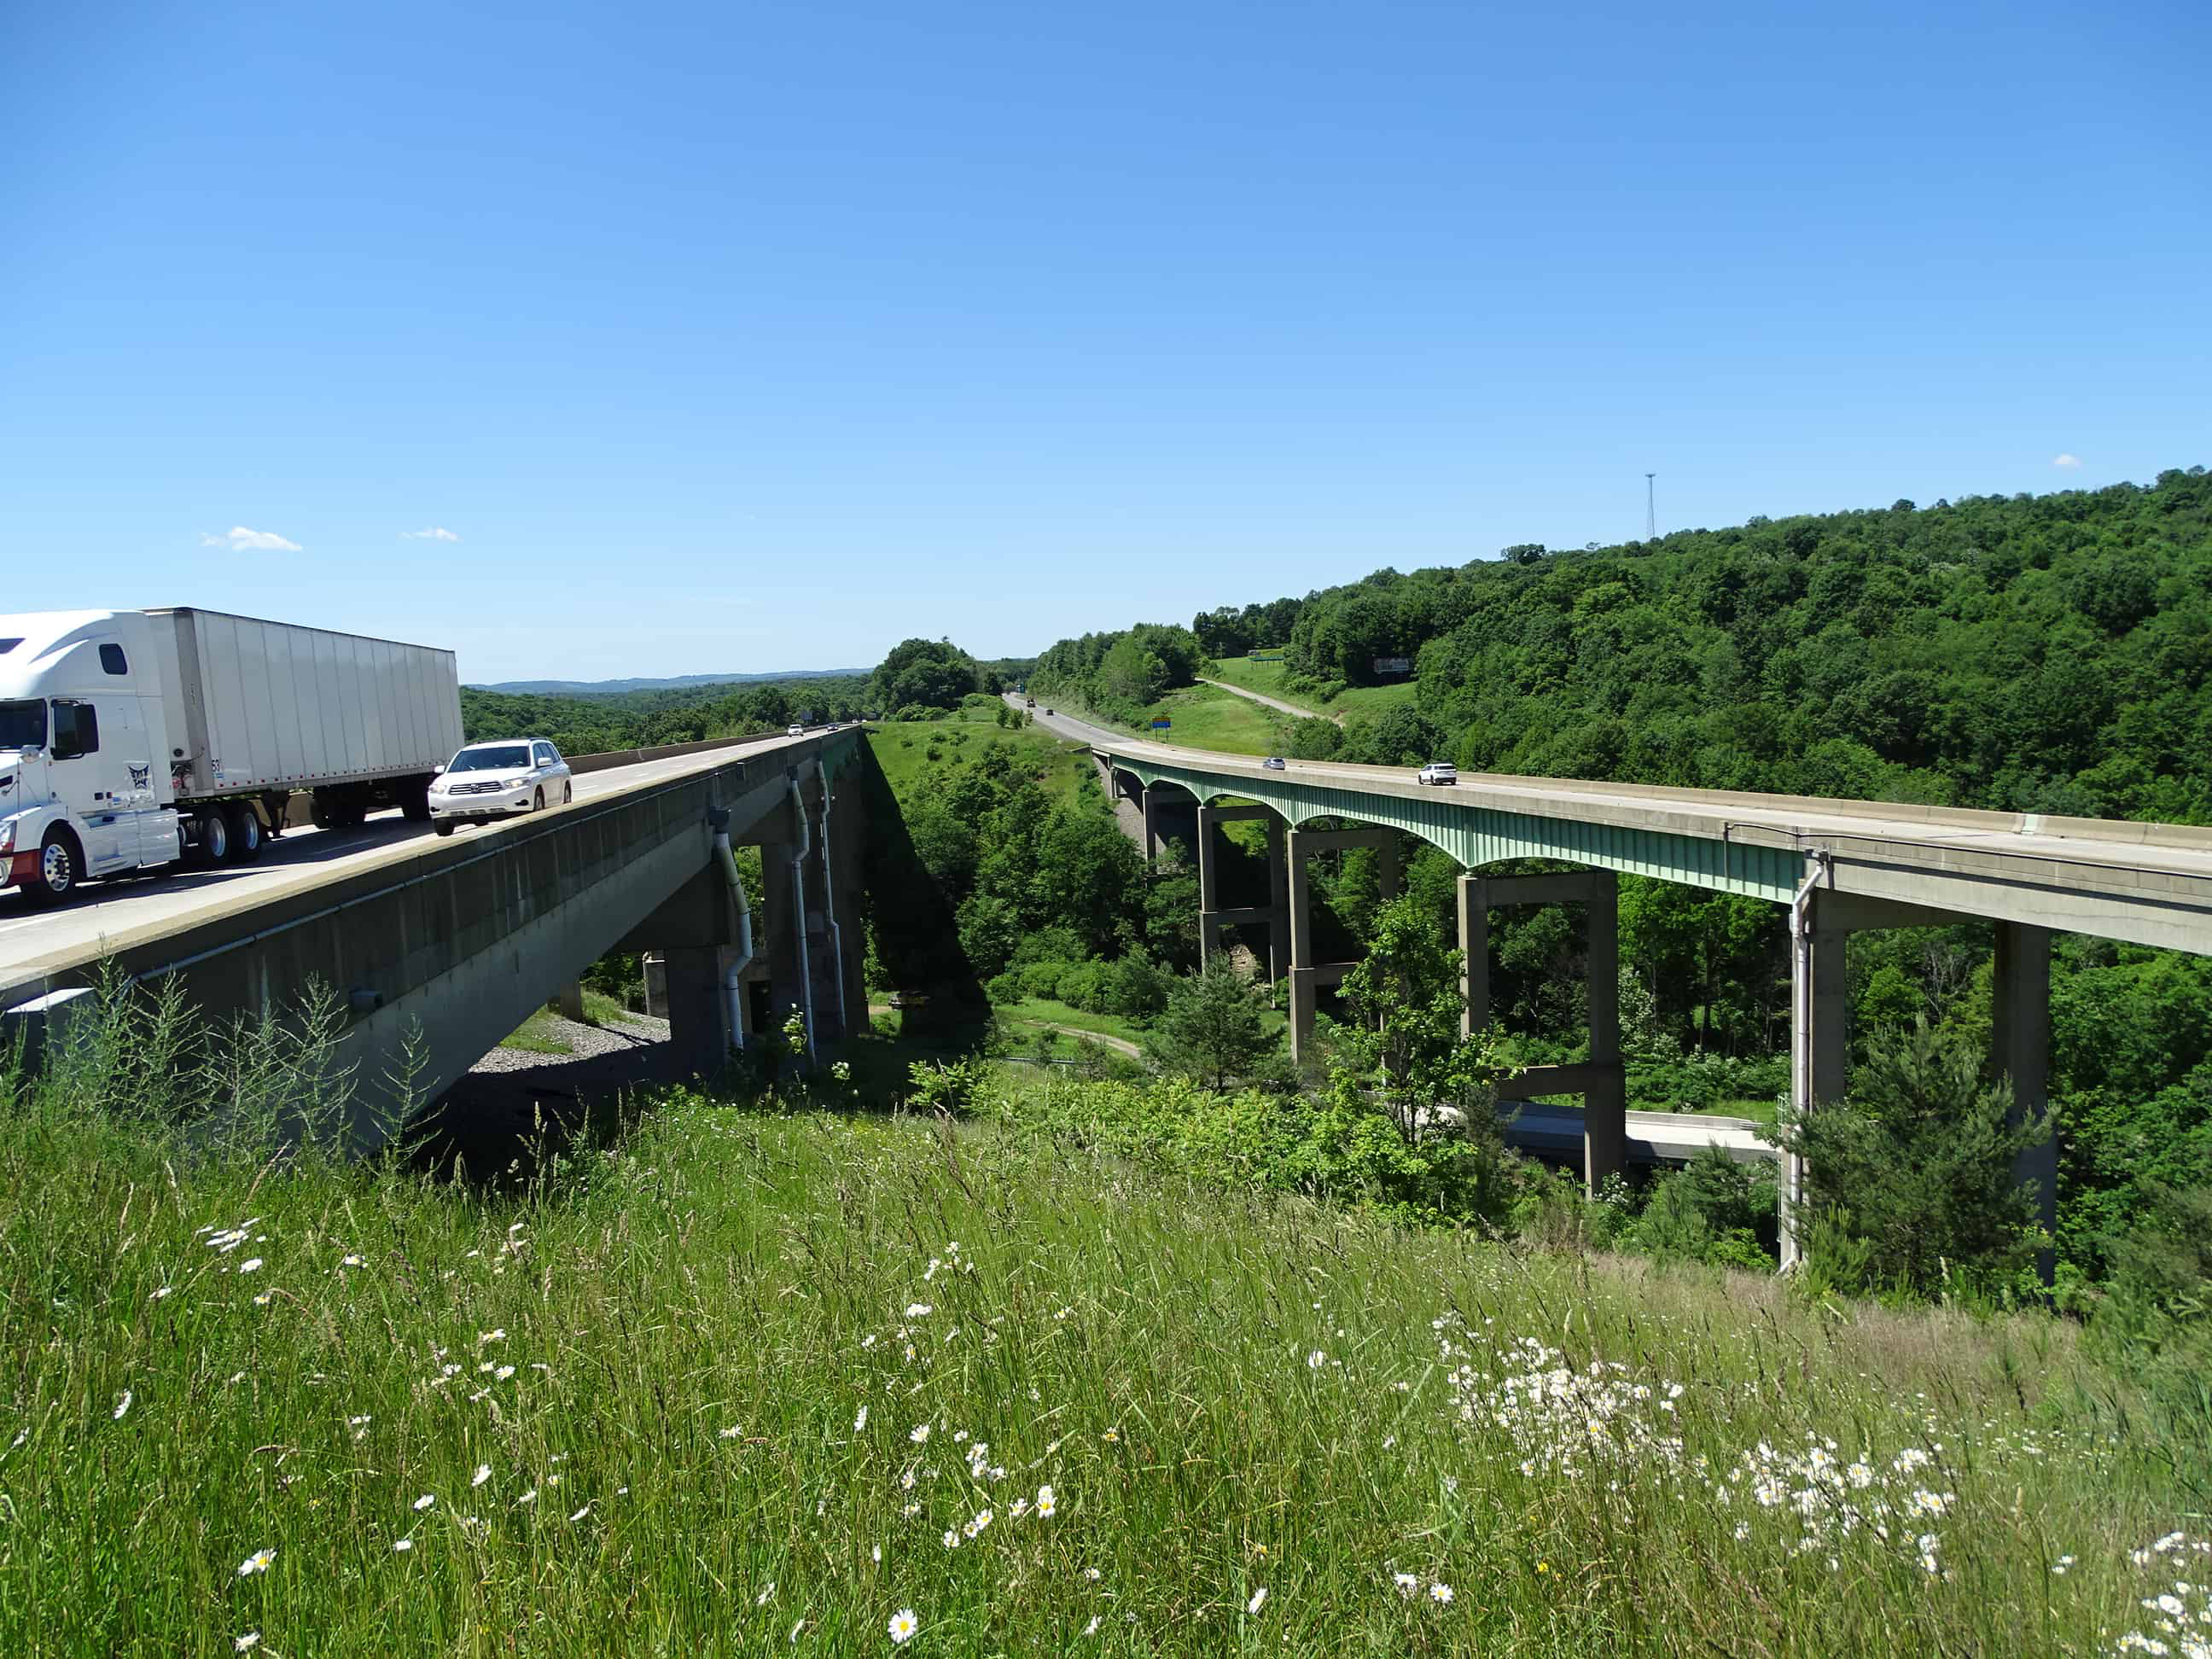 Construction on the Interstate 80 Canoe Creek Bridge located in Clarion County is expected to be completed in the fall of 2027.